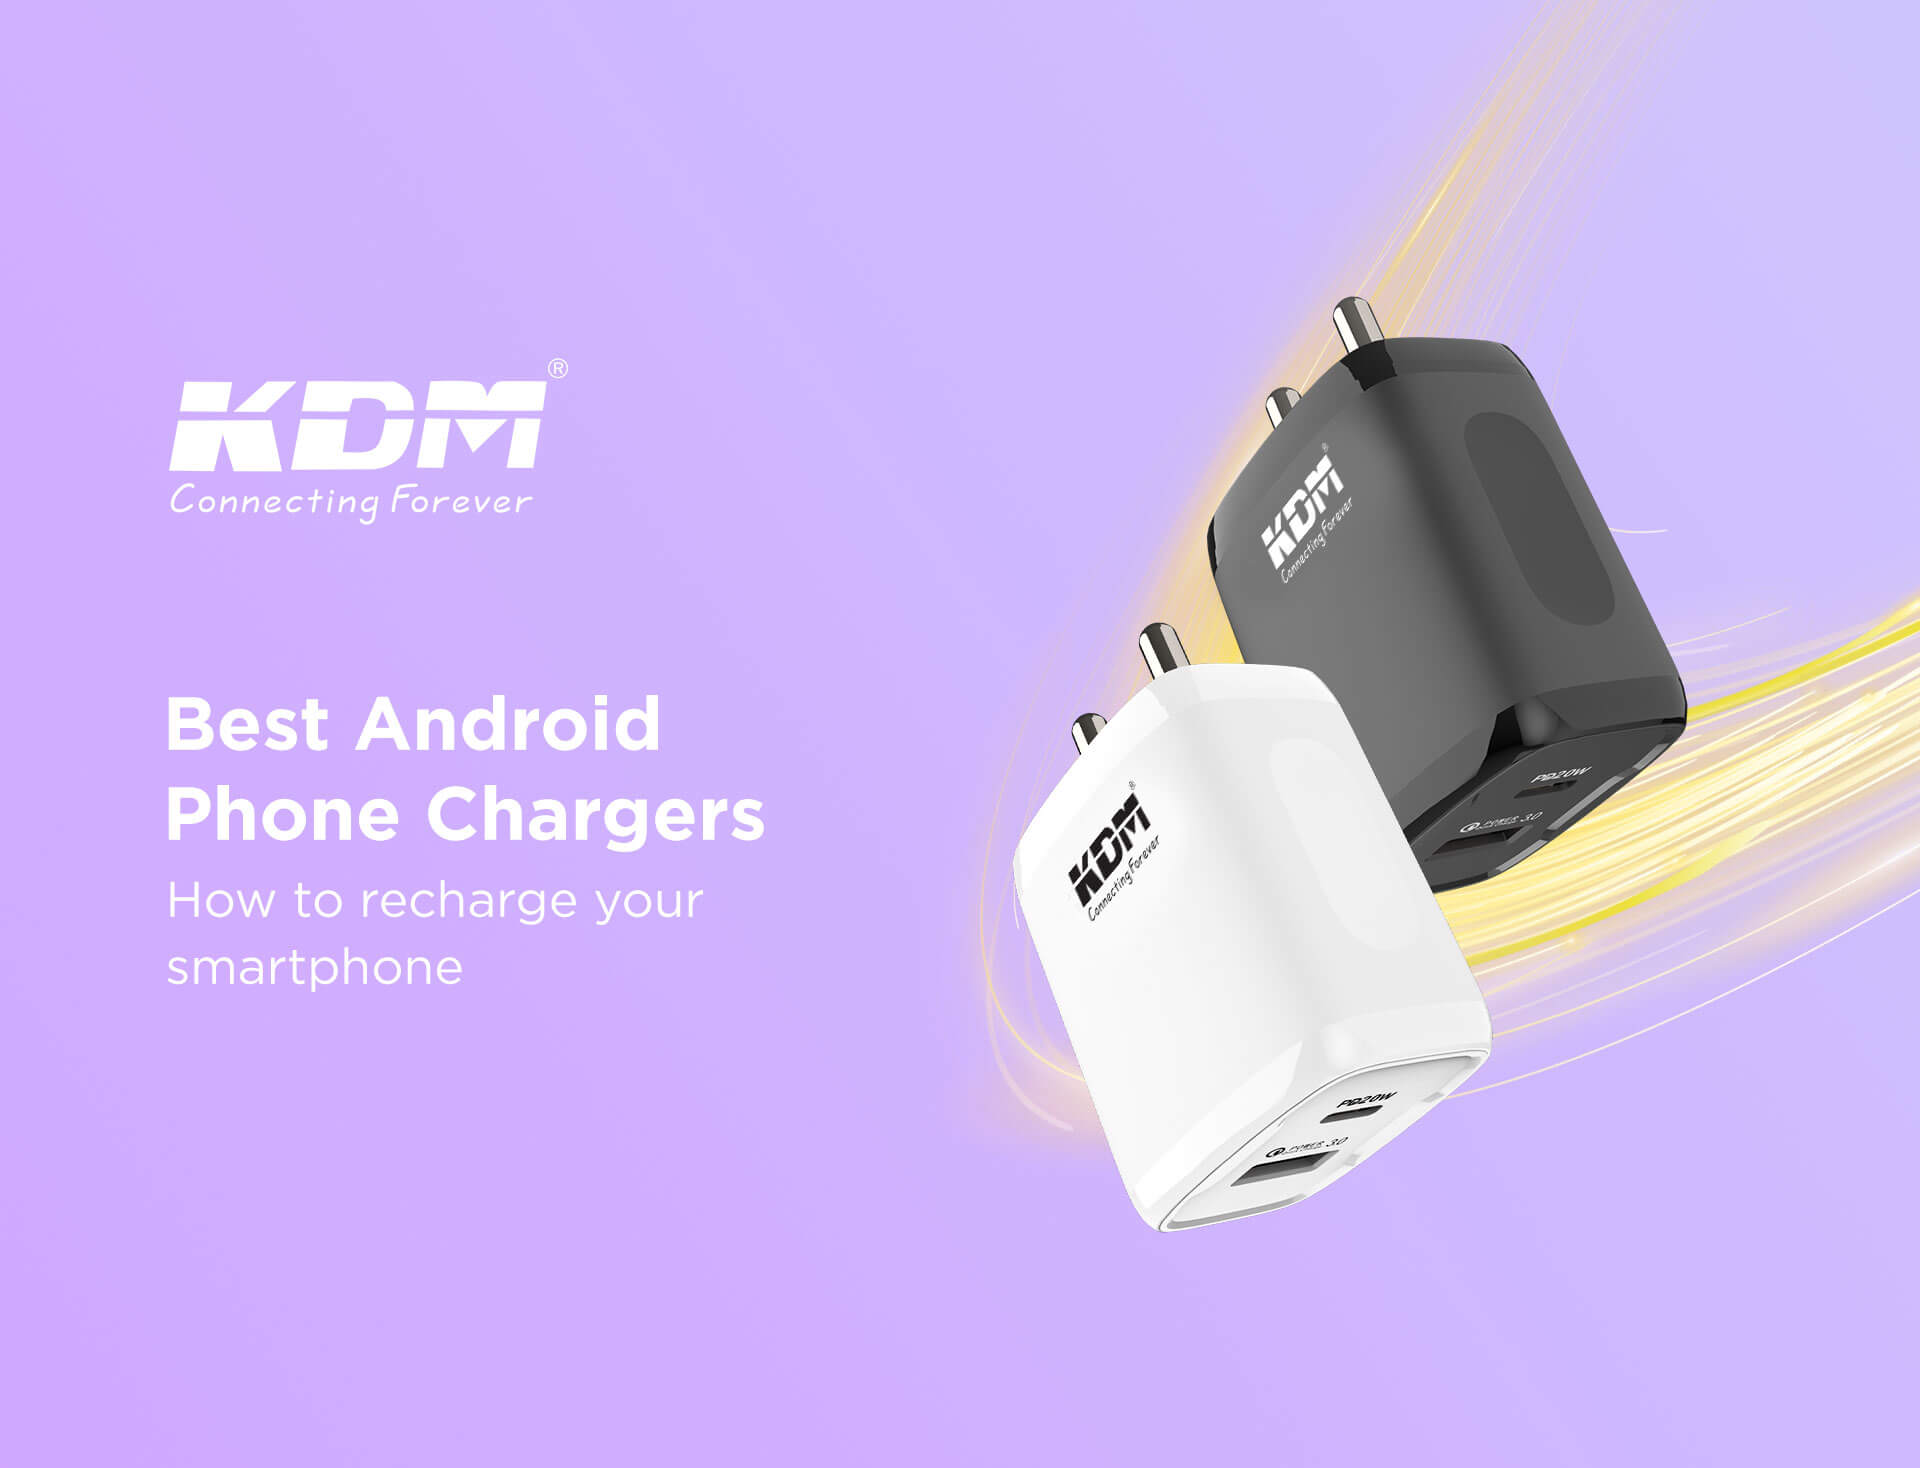 Best-Android-Phone-Chargers-How-to-recharge-your-smartphone.jpg